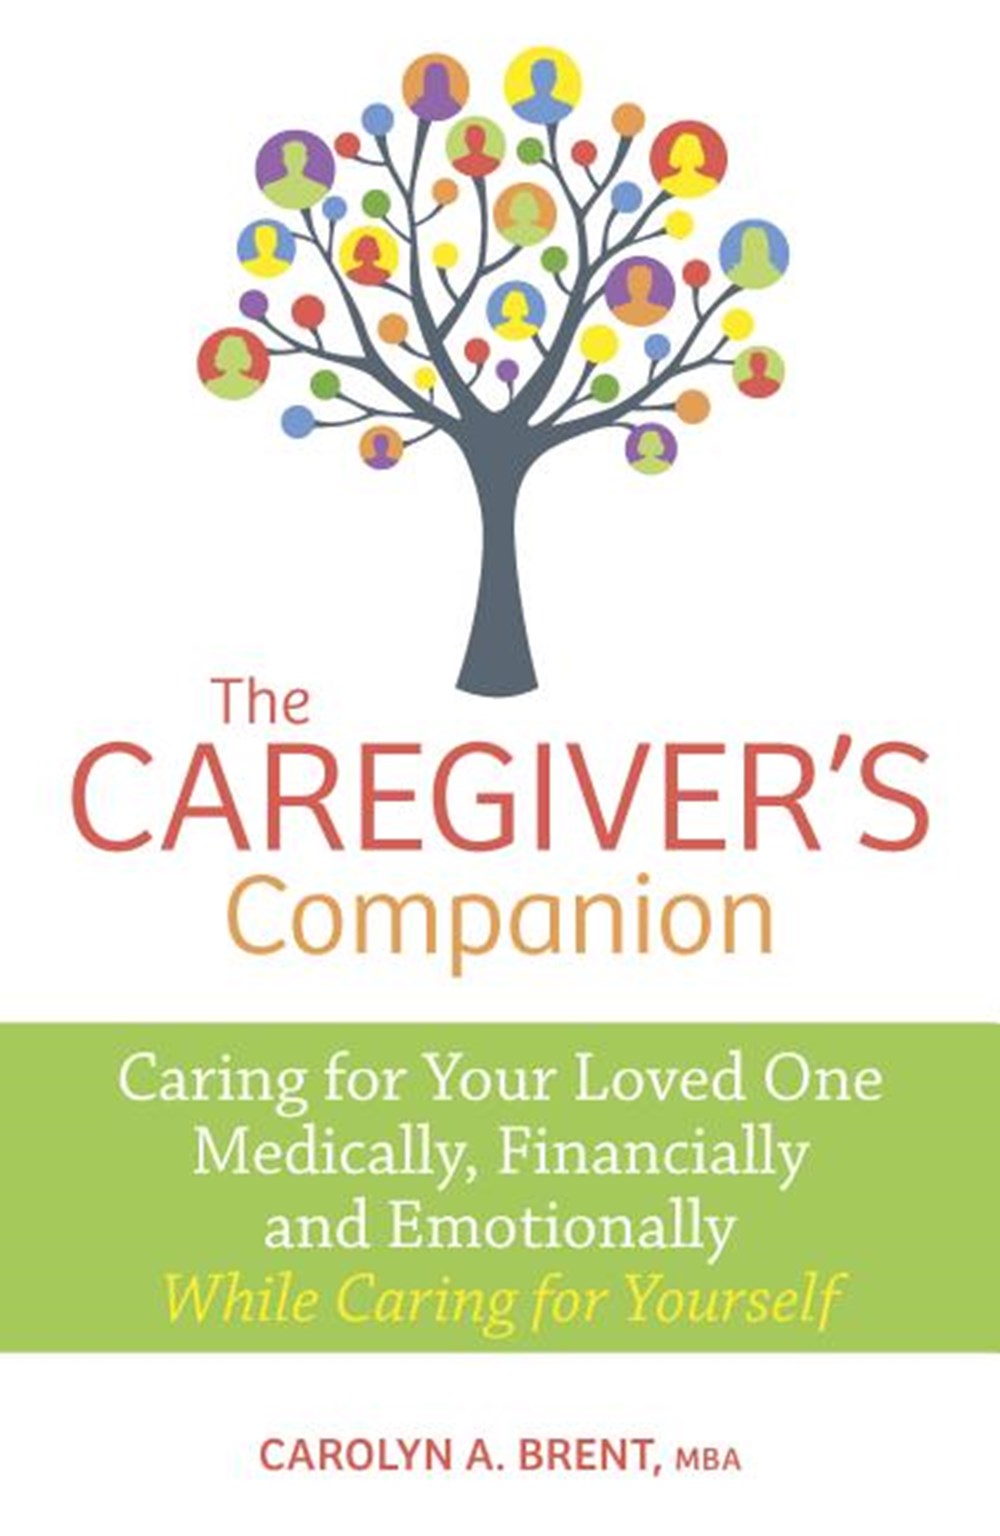 Caregiver's Companion: Caring for Your Loved One Medically, Financially and Emotionally While Caring